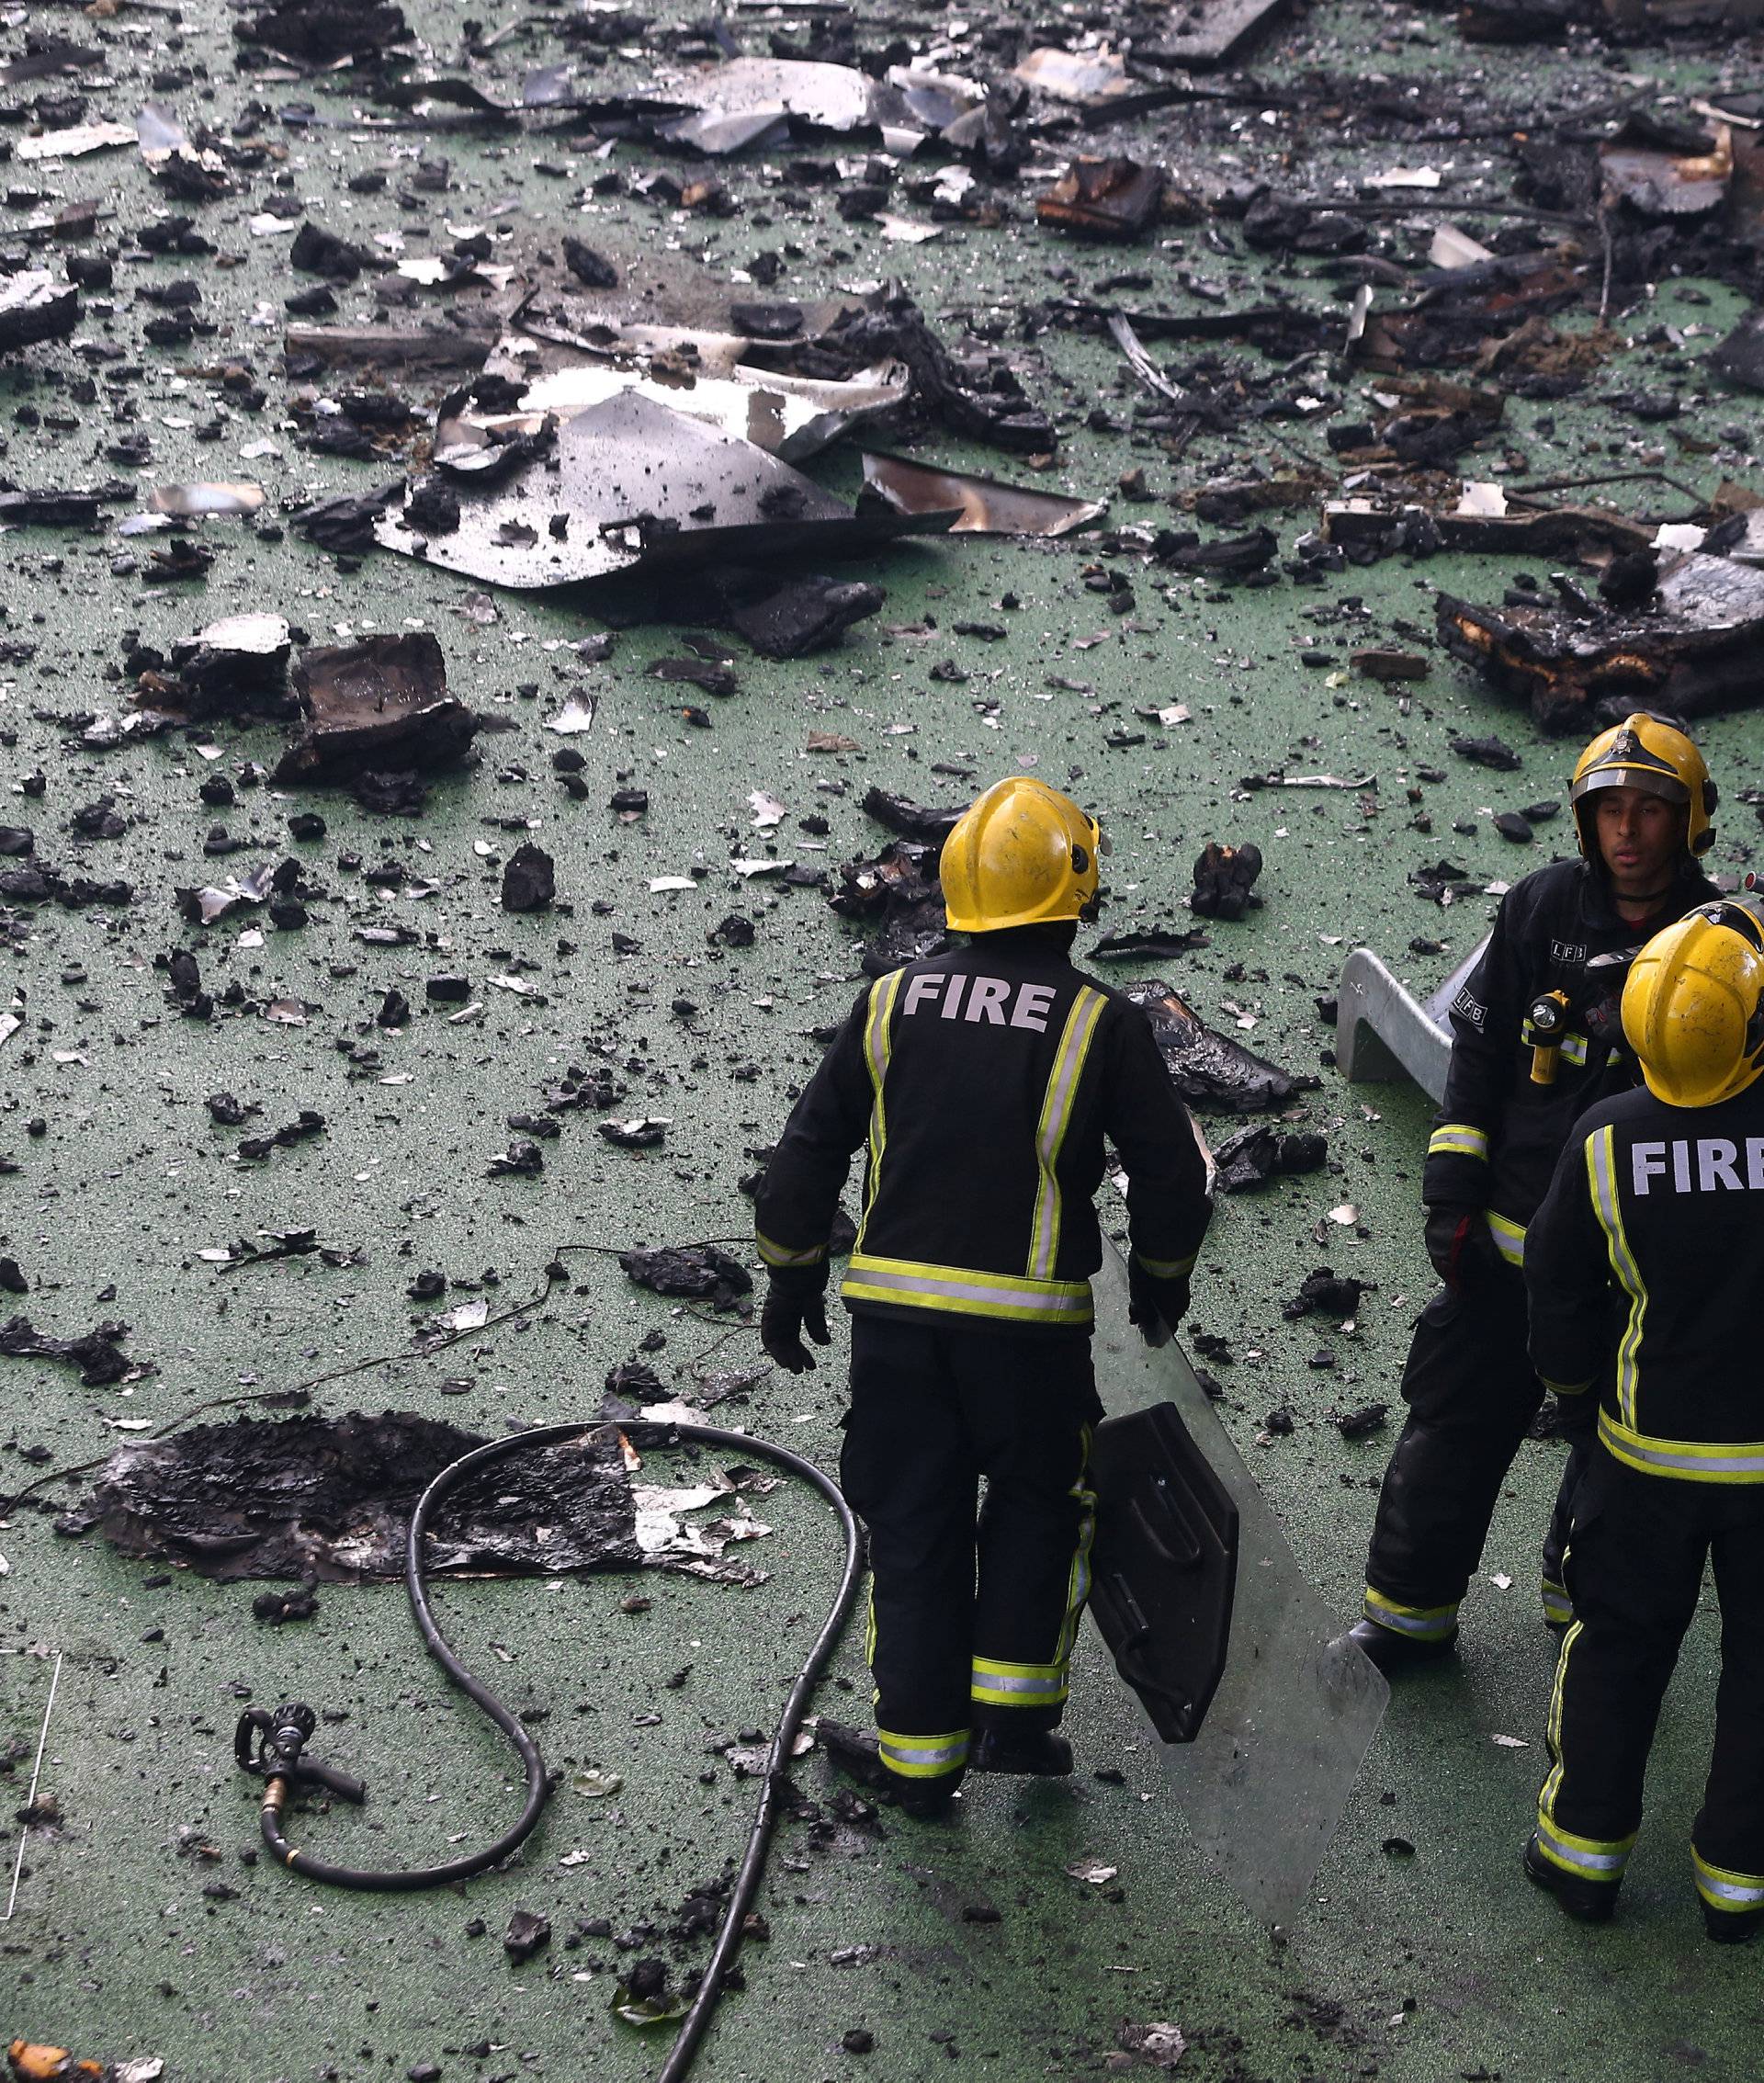 Firefighters stand amid debris in a childrens playground near a tower block severly damaged by a serious fire, in north Kensington, West London